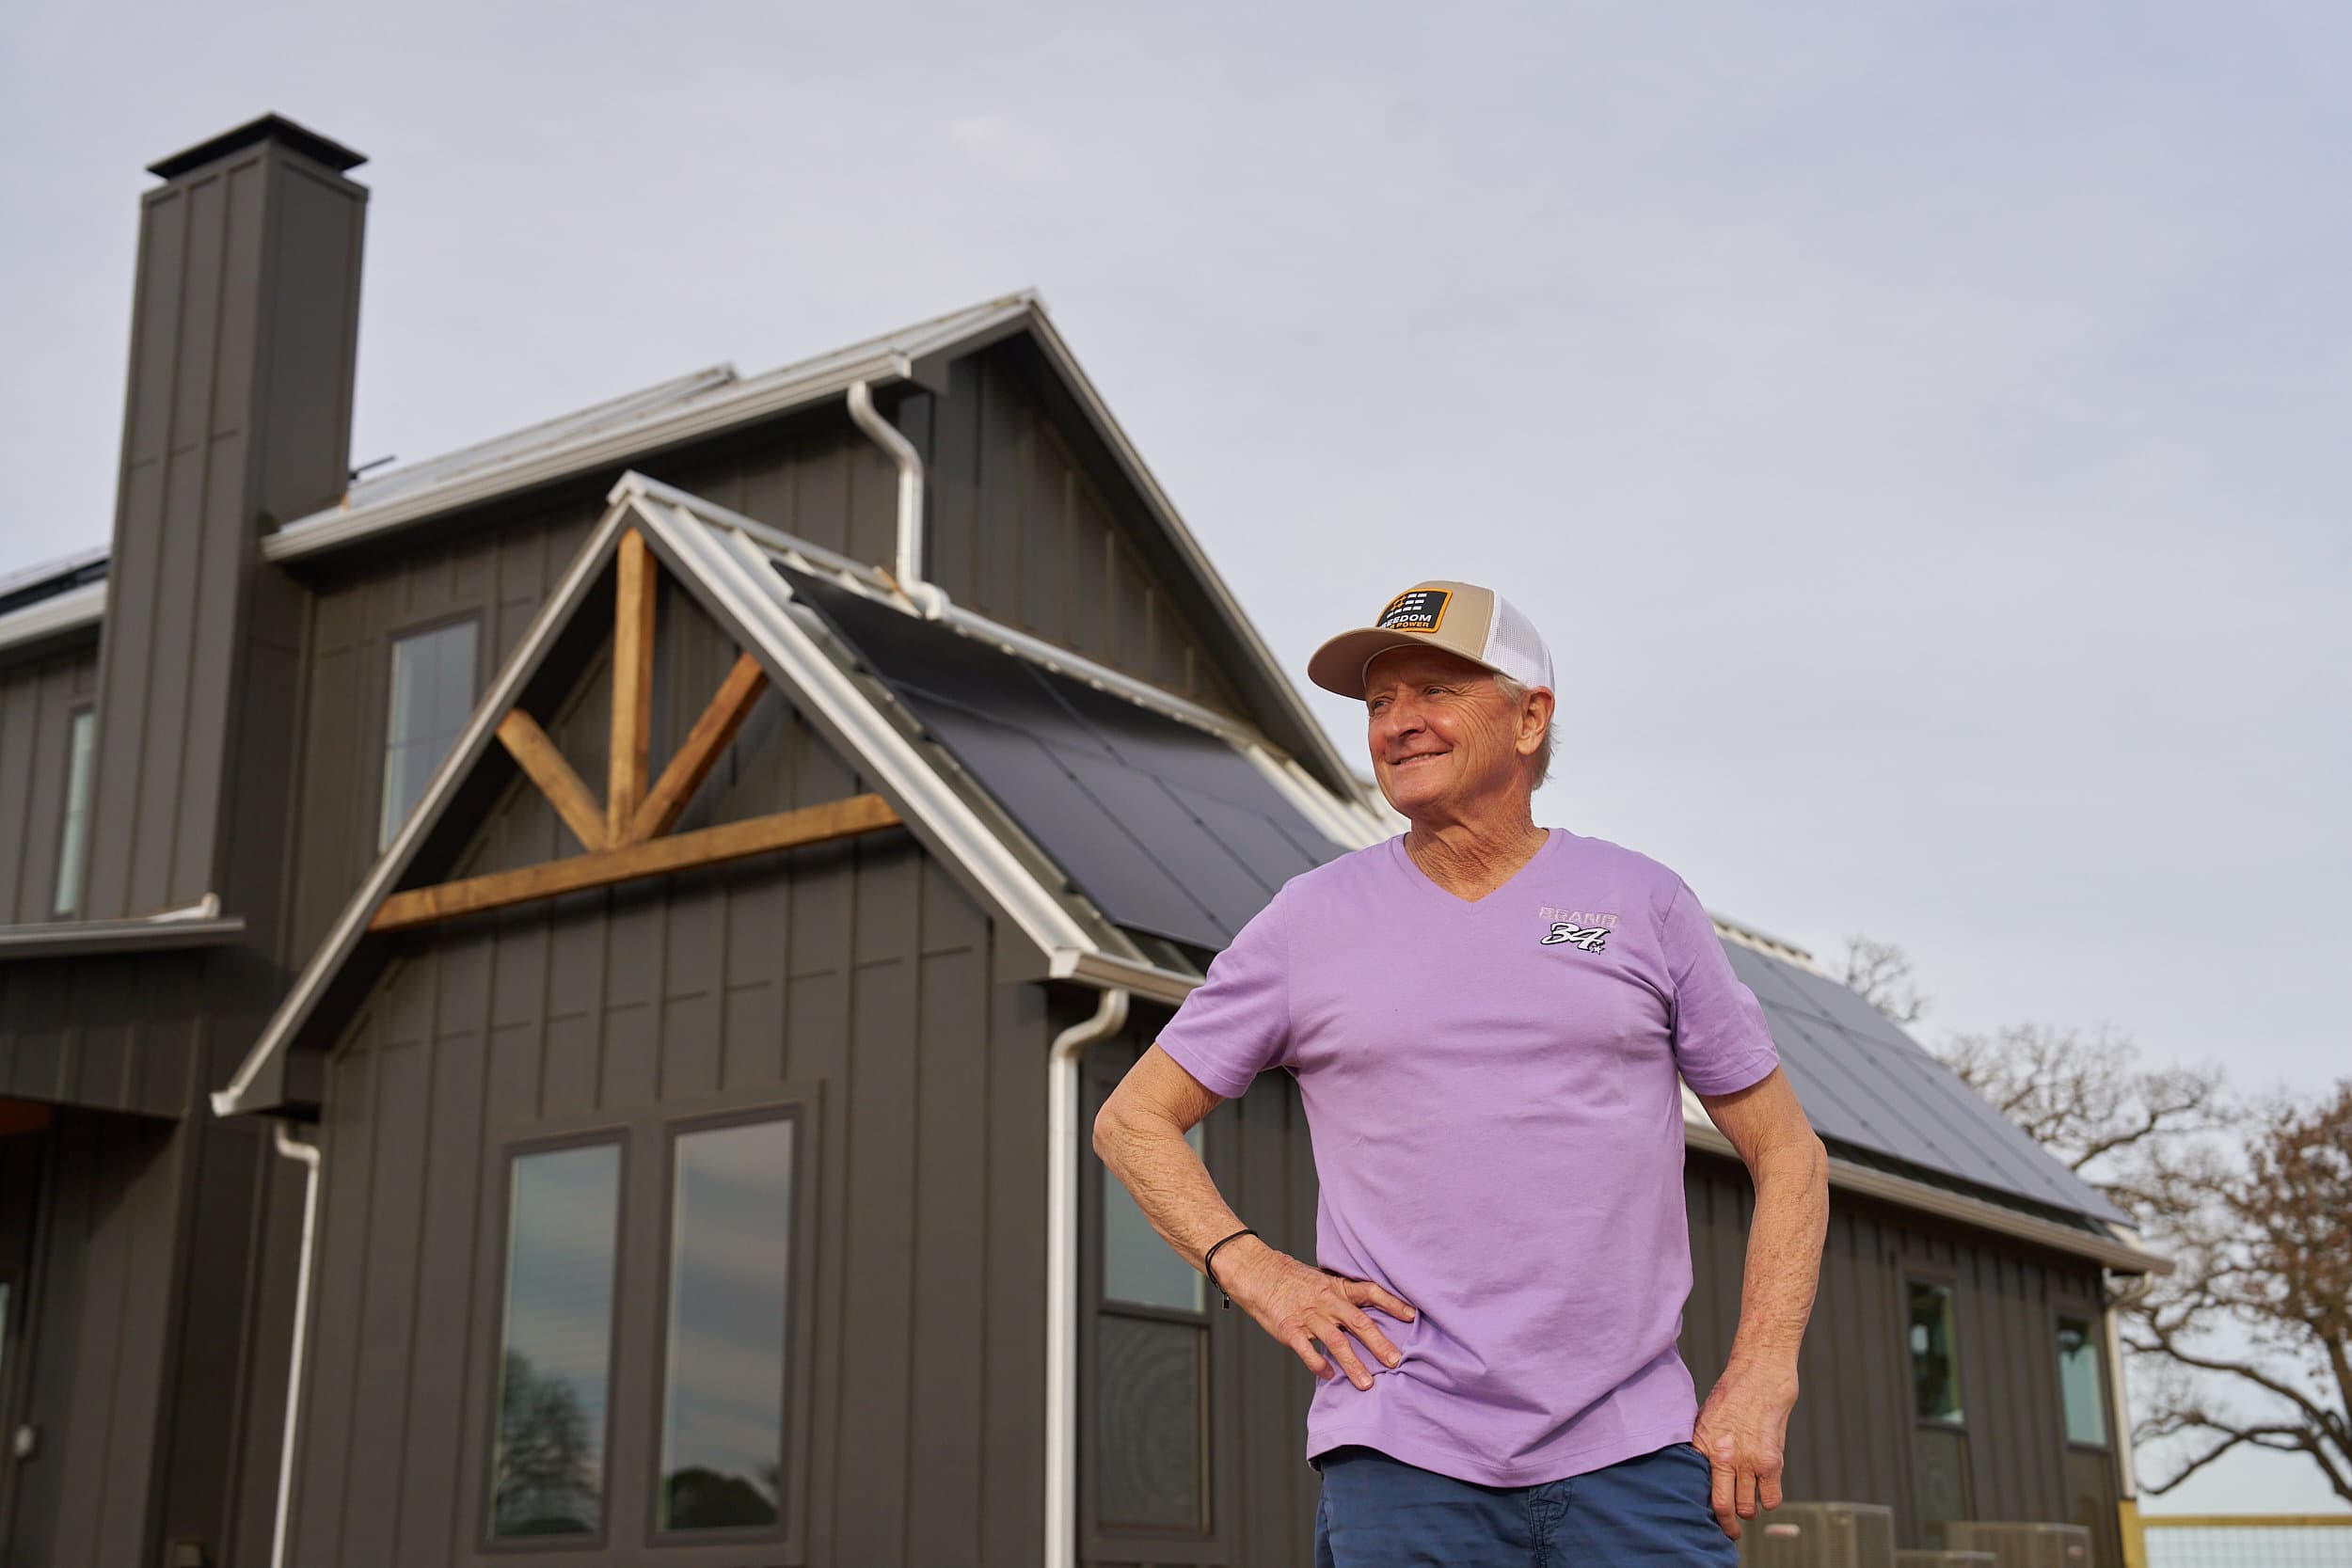 Smiling man in purple t-shirt standing in front of modern ranch home with solar panels on roof.